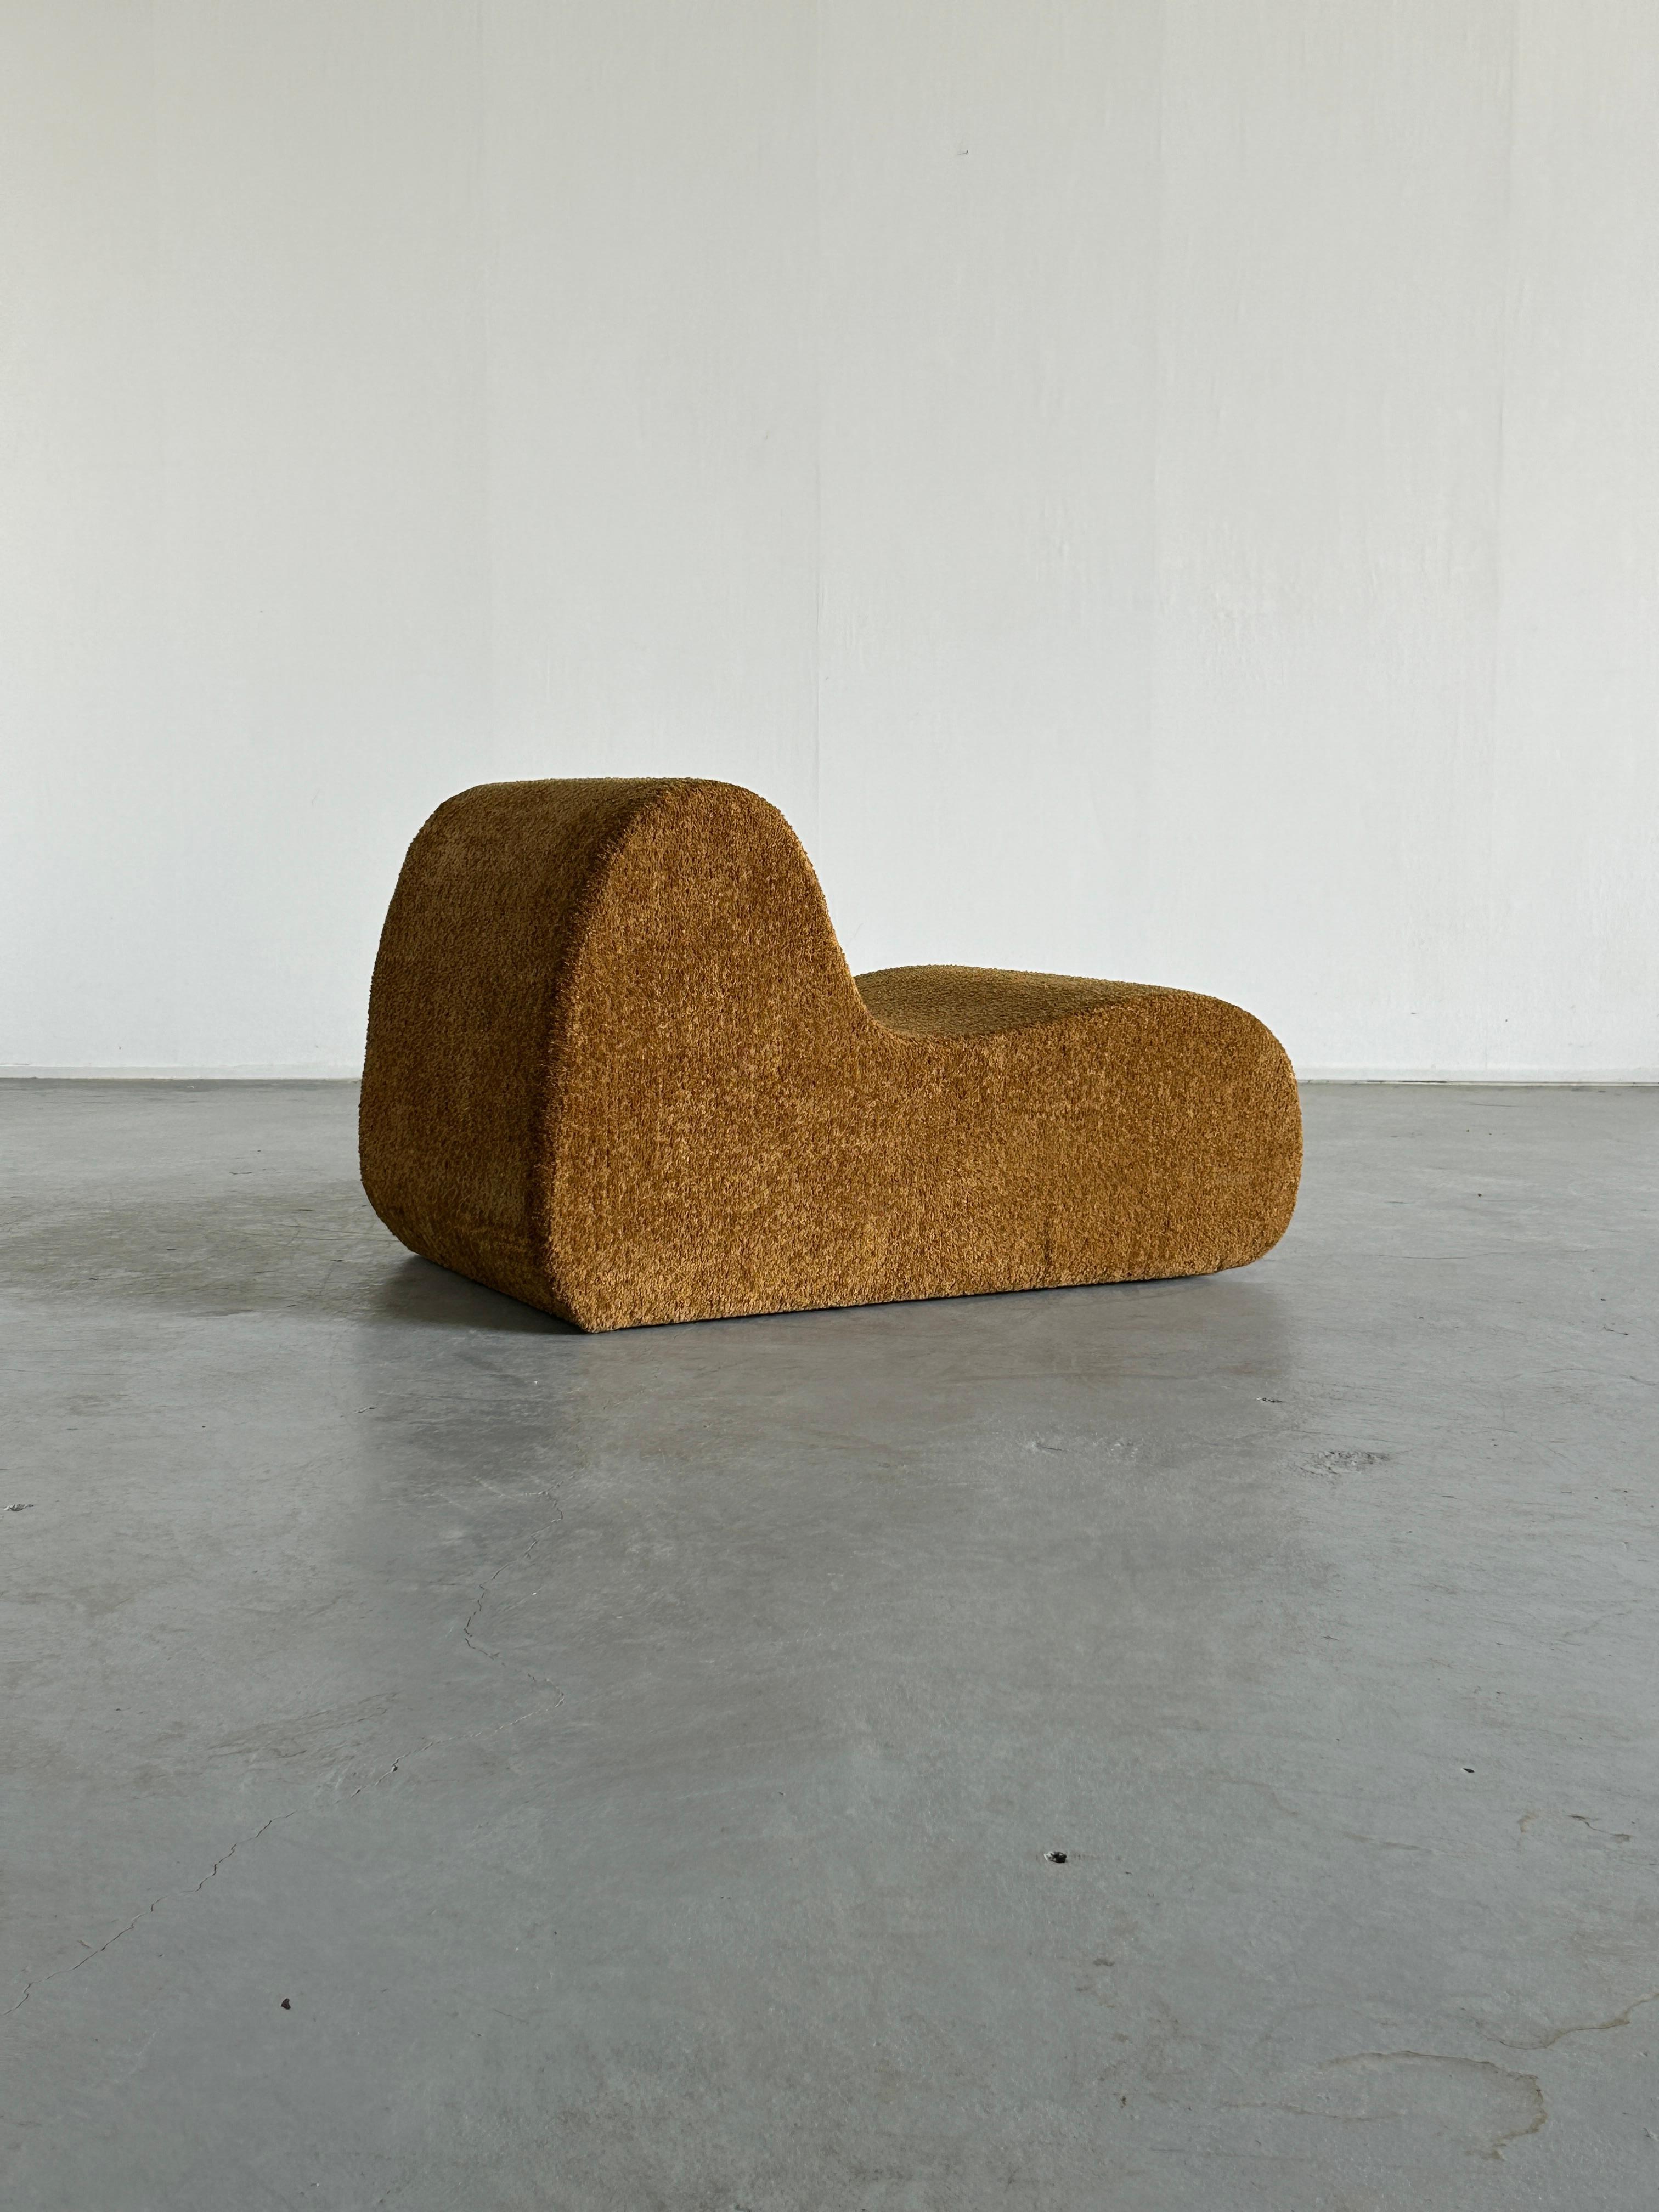 Vintage Italian Mid-Century-Modern Lounge Chair in Ochre Boucle, 1970s Italy For Sale 4